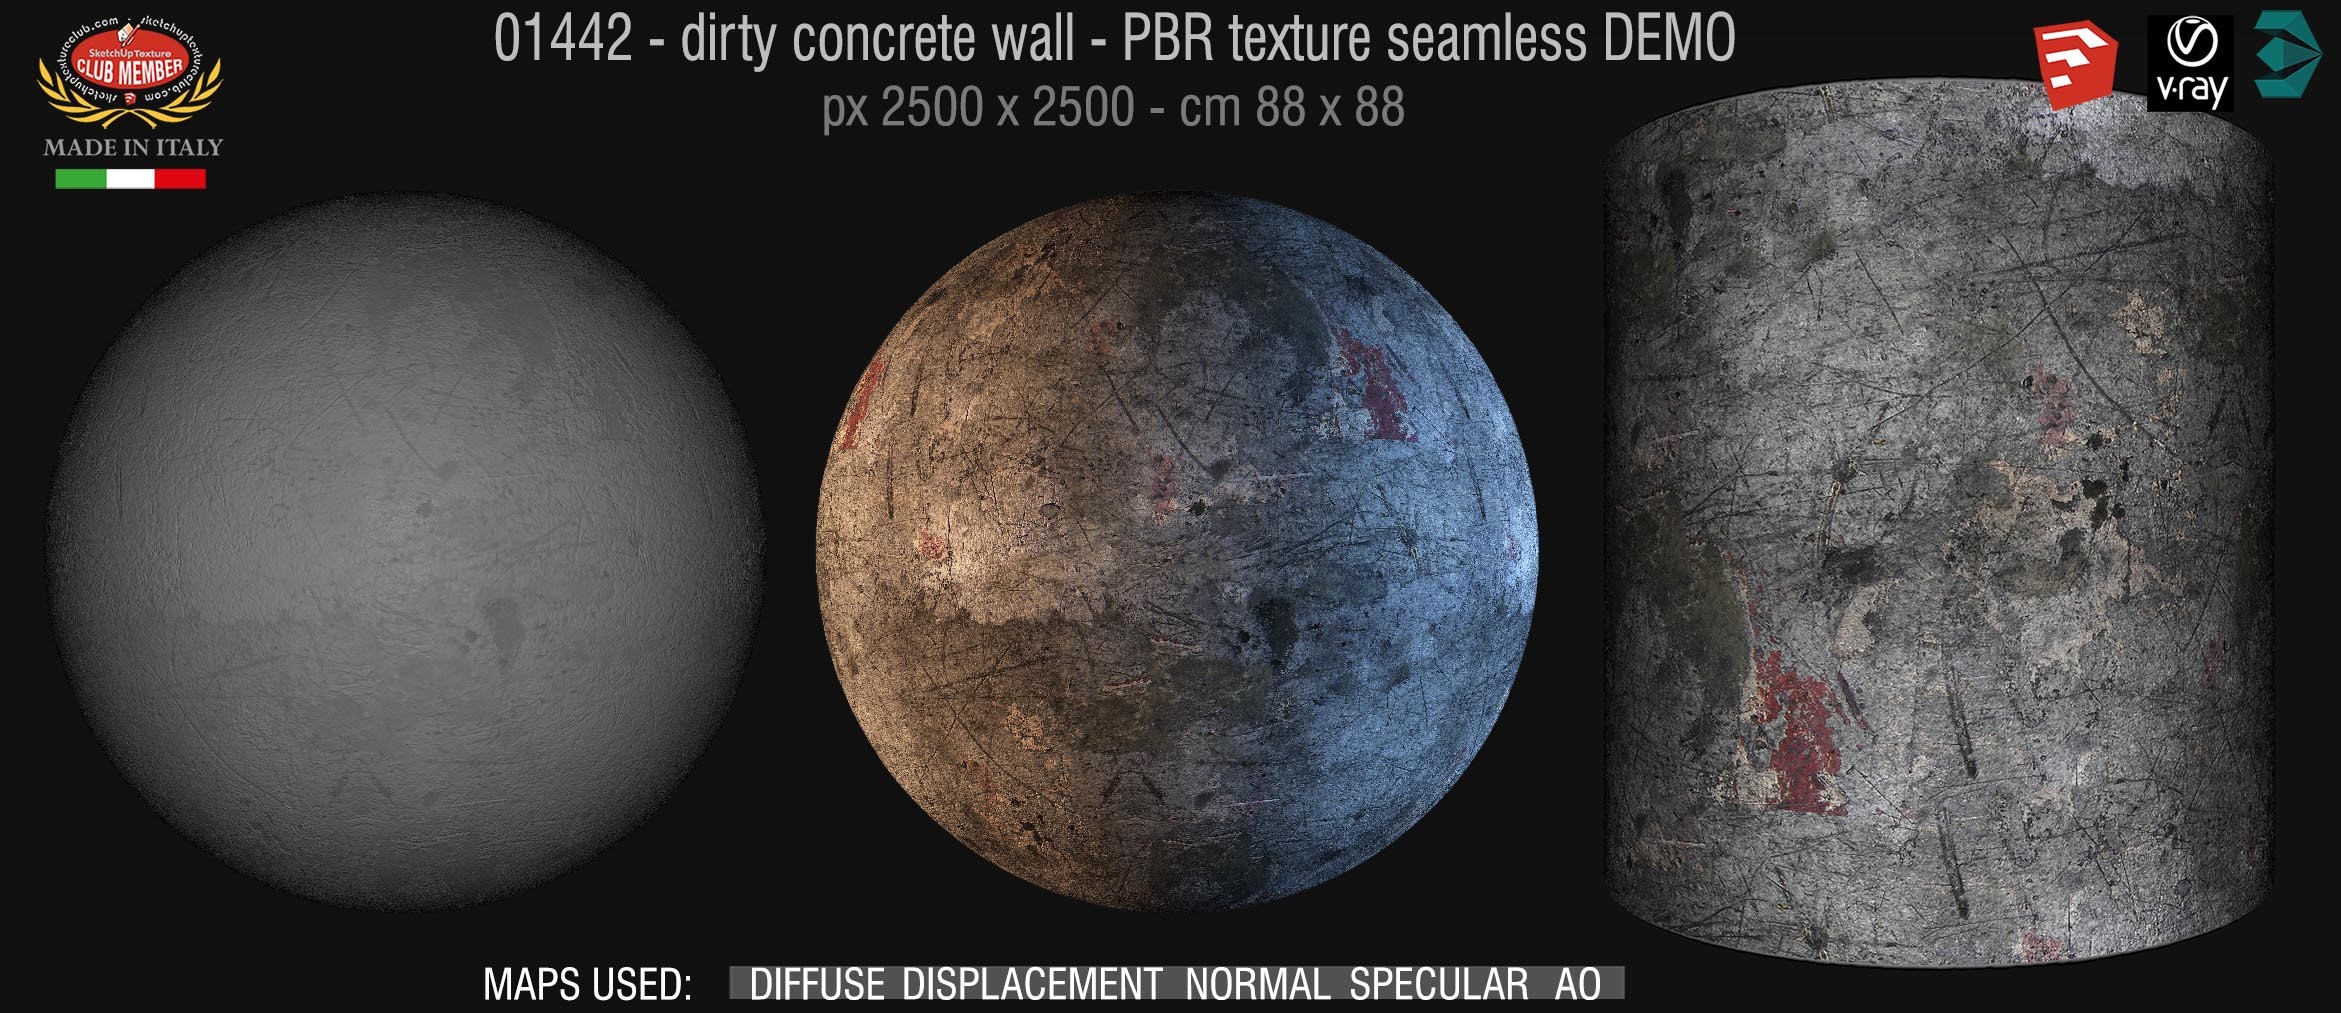 01442 Concrete bare dirty wall PBR texture seamless DEMO